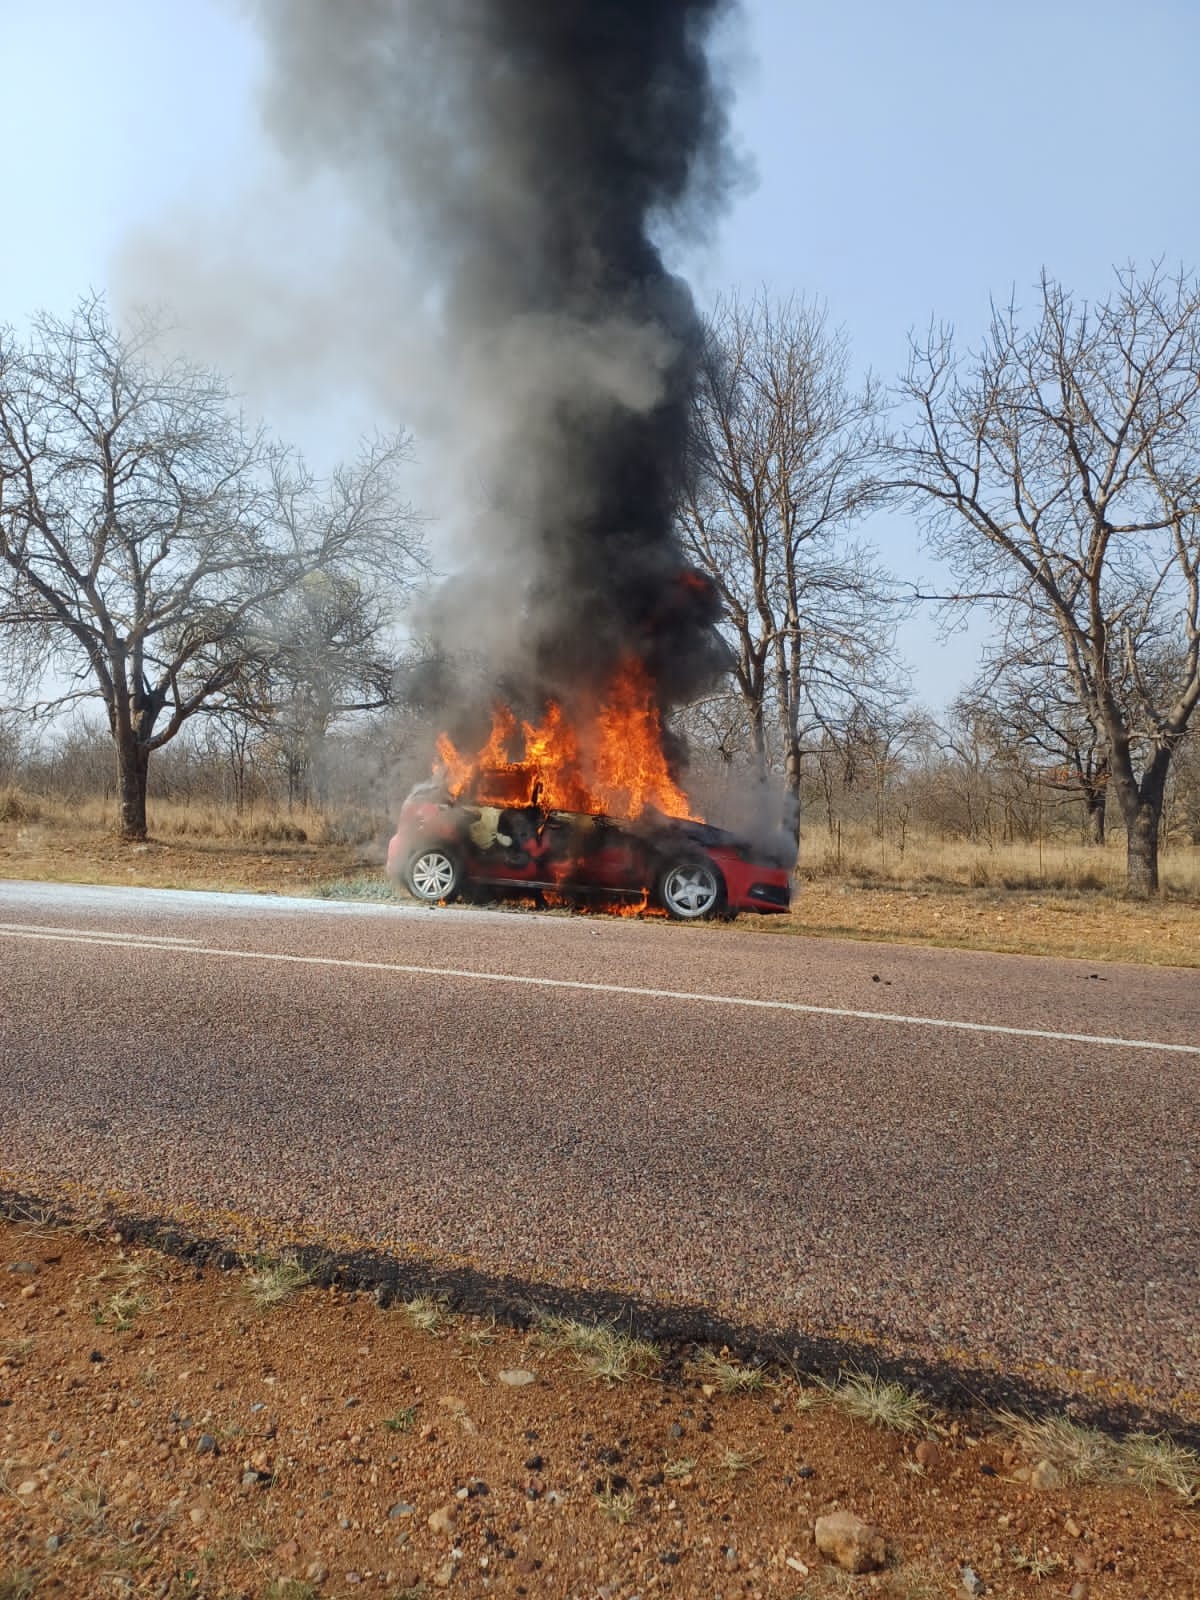 A vehicle caught fire 28km from Phalaborwa